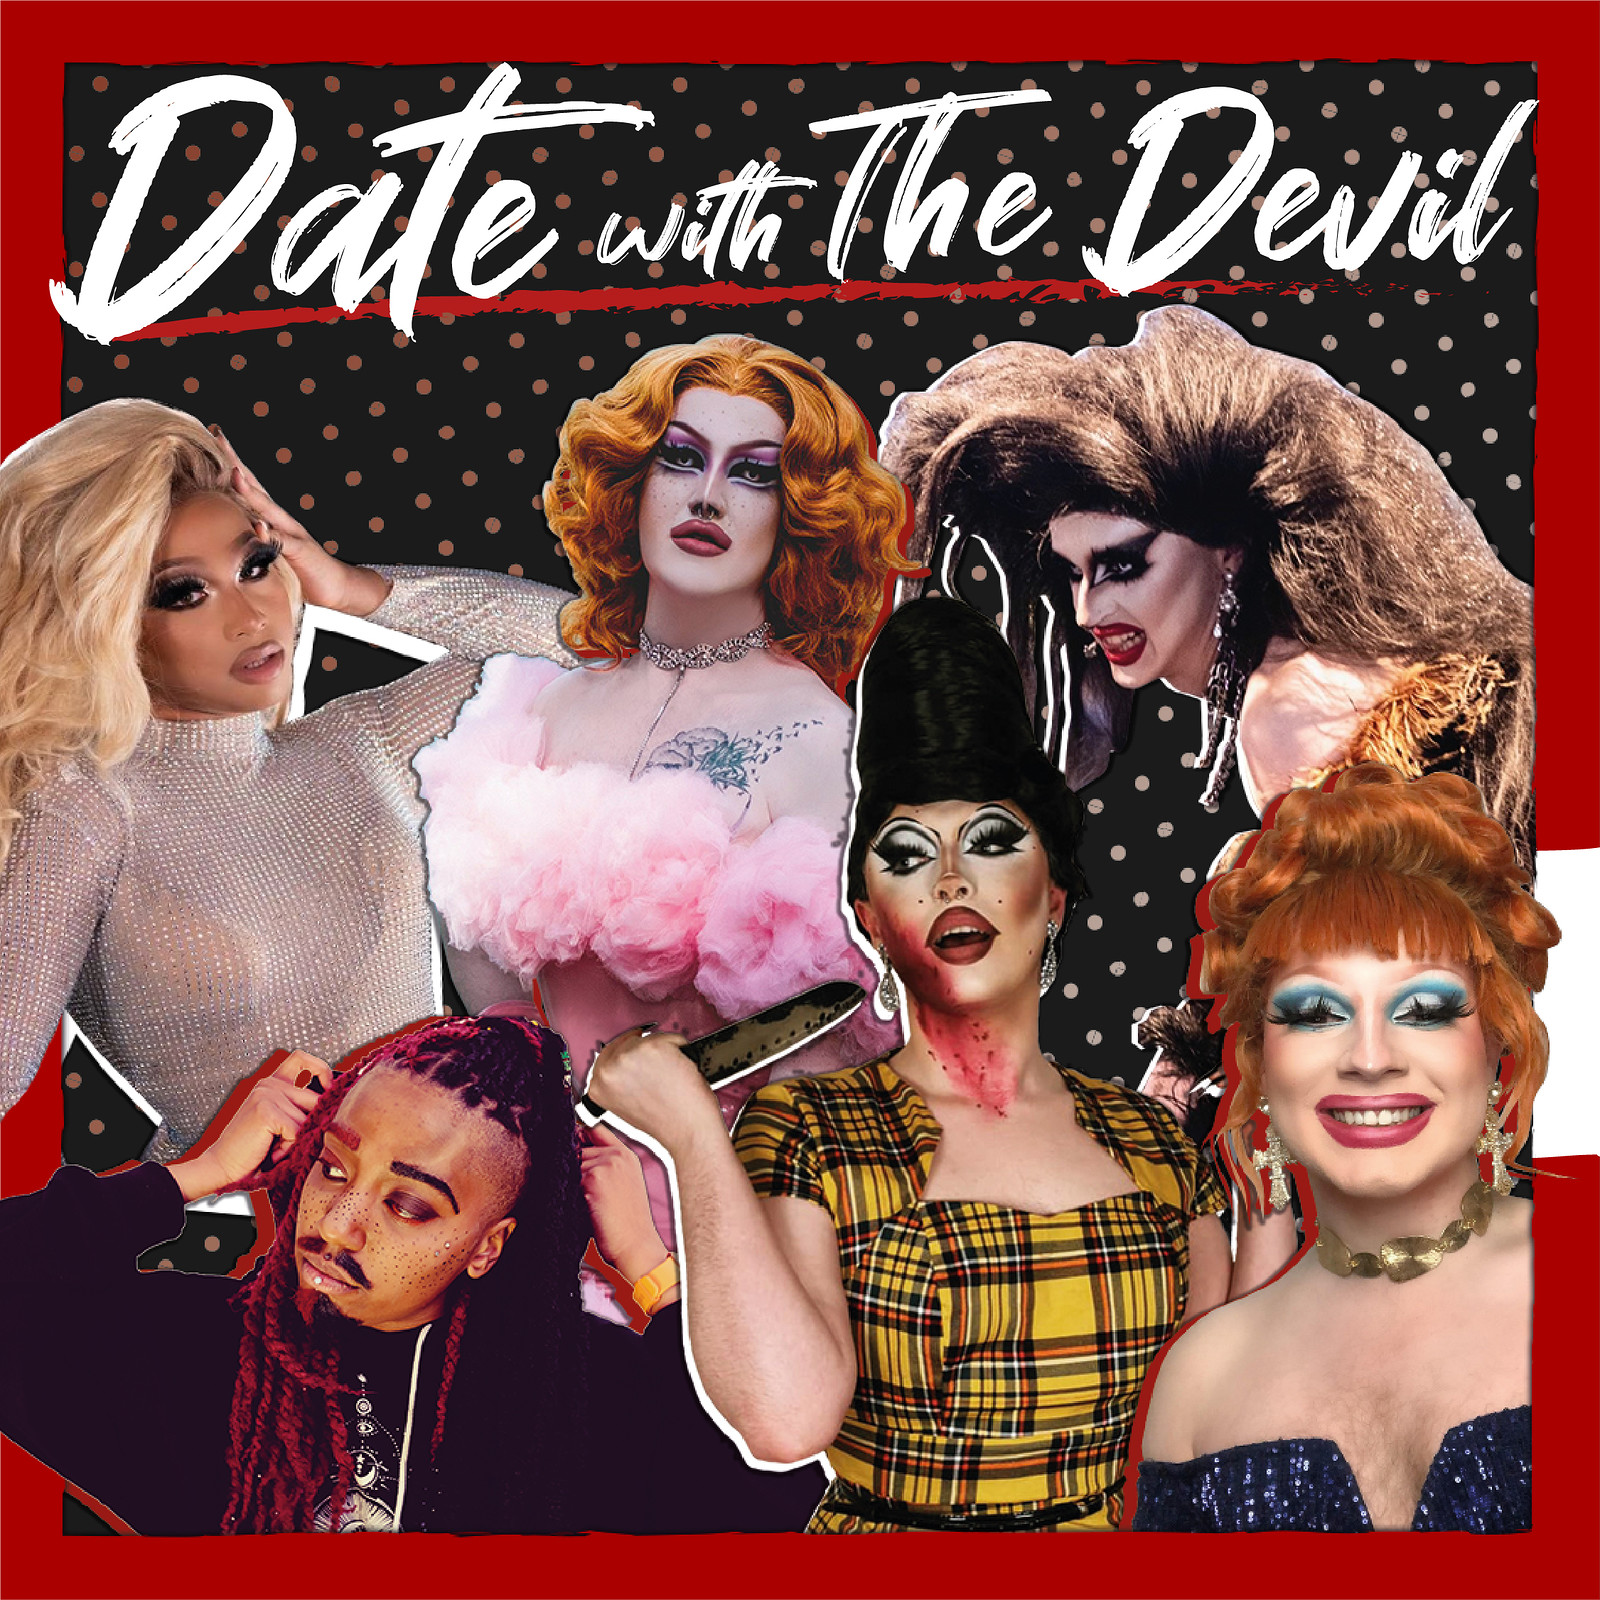 Date with The Devil at The Cloak and Dagger